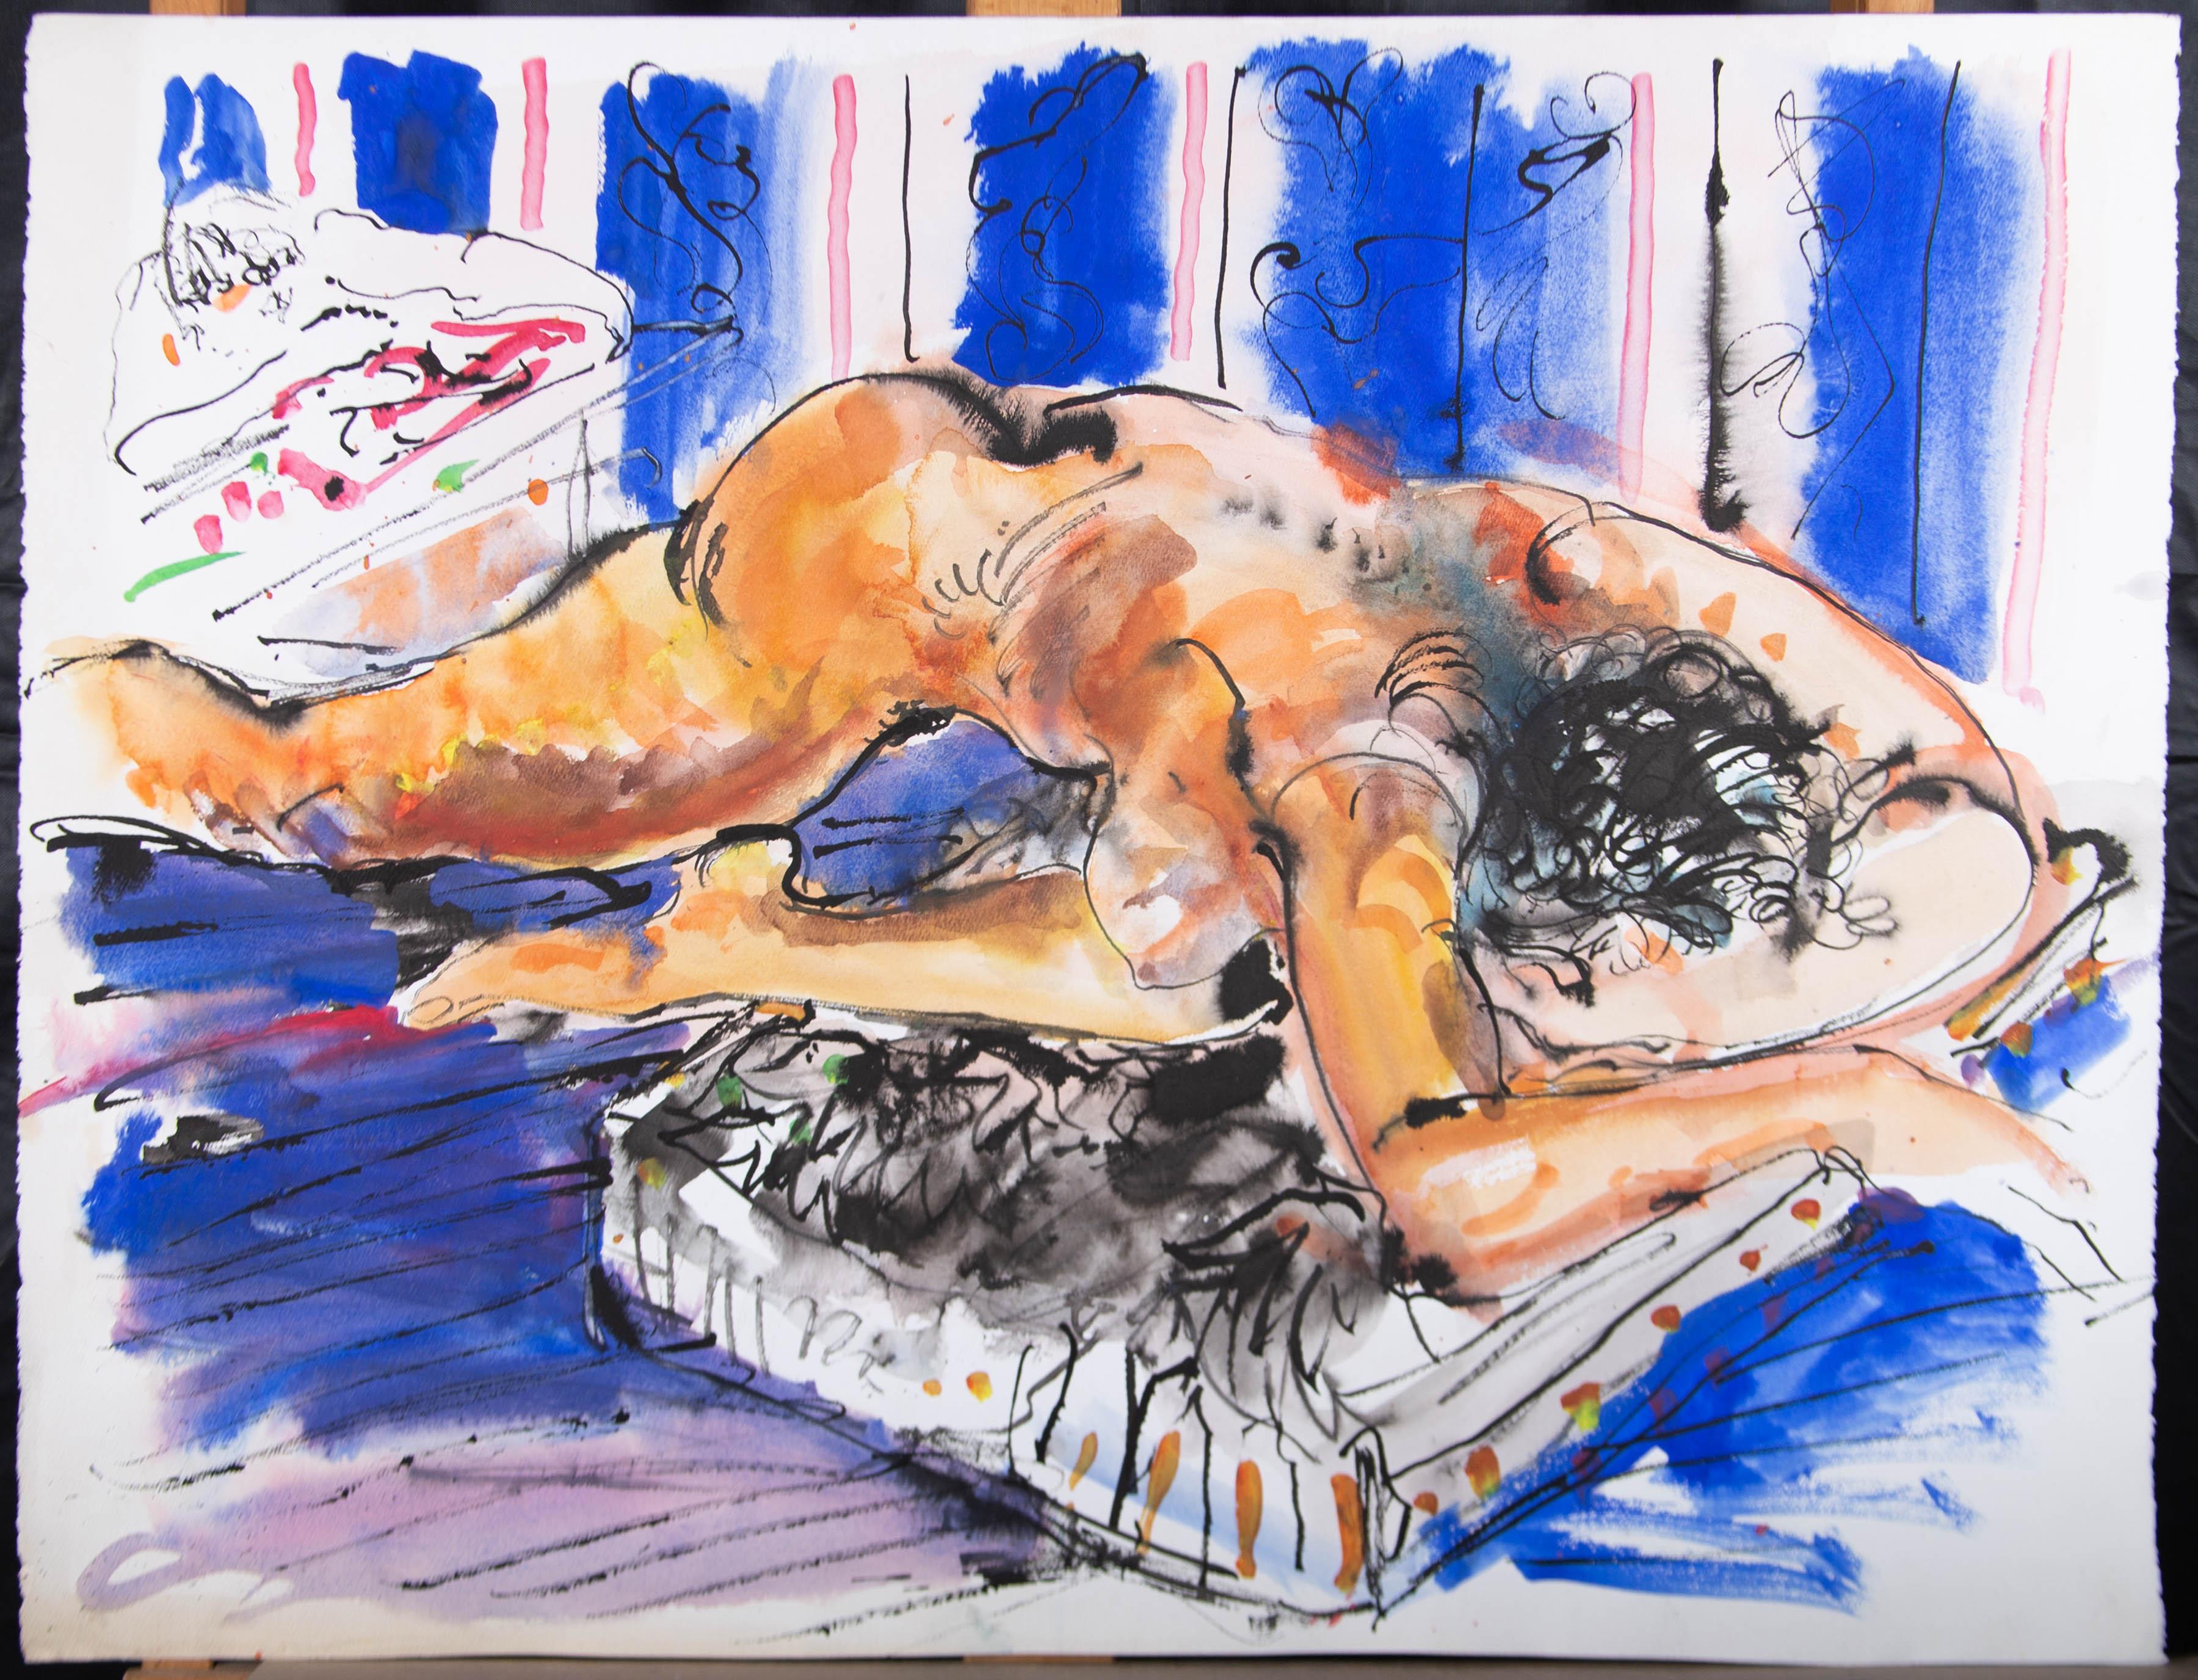 An expressive and vibrant watercolour painting with pen and ink by the American artist Hendrick Grise. The scene depicts an interior setting with a sleeping nude figure. Even though this work is unsigned, it belongs to a collection by the artist. On